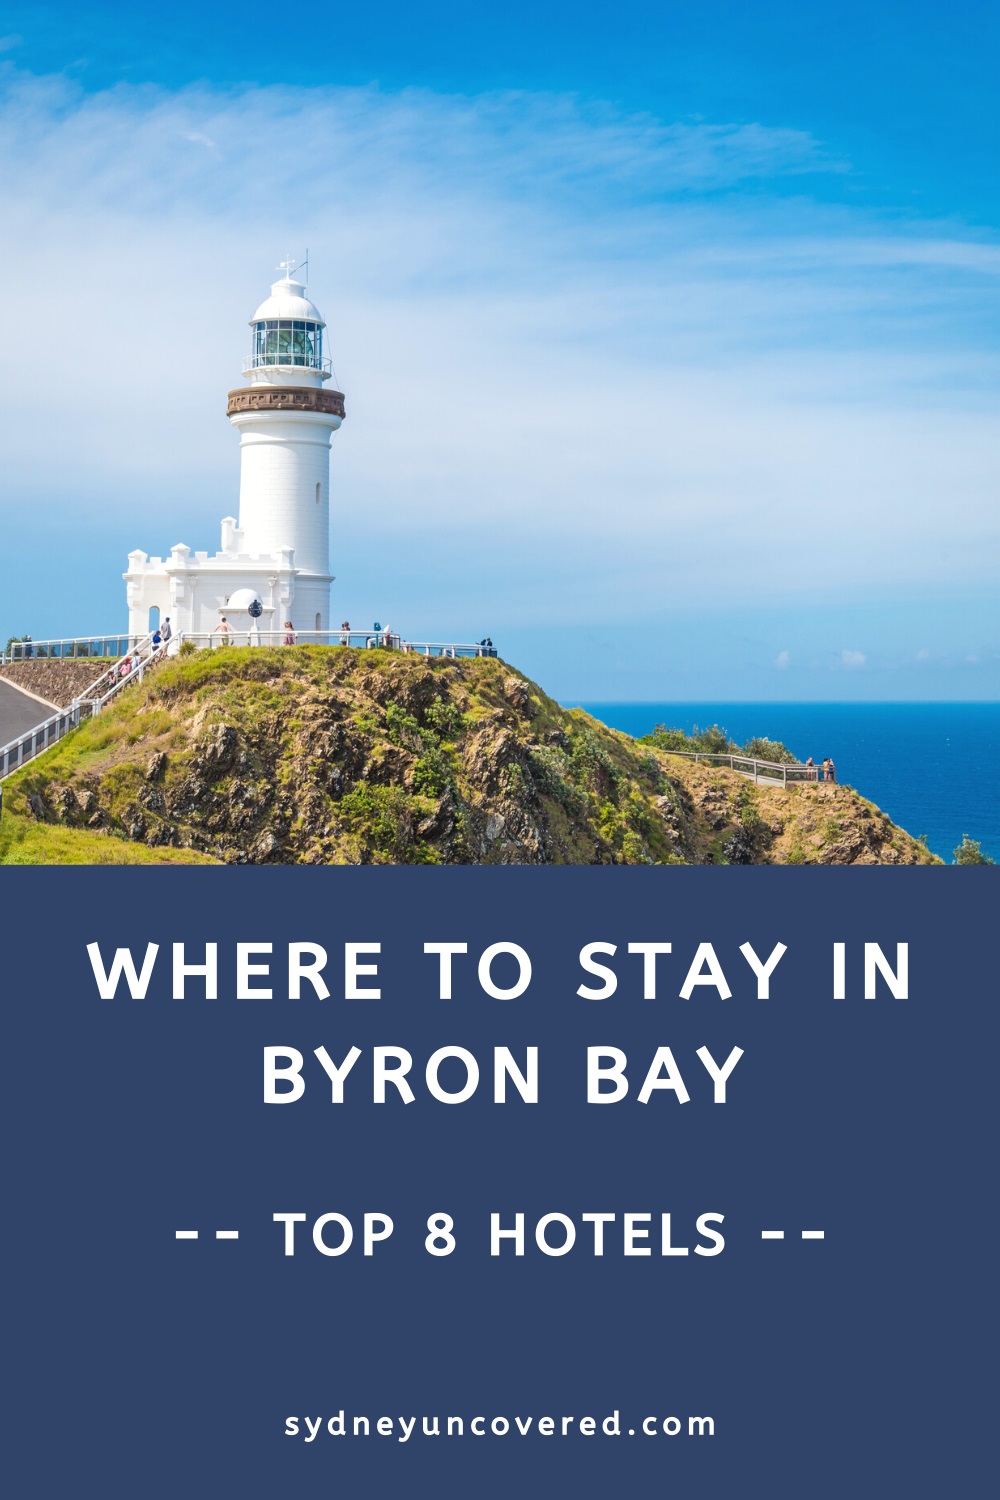 Where to stay in Byron Bay (accommodation guide)